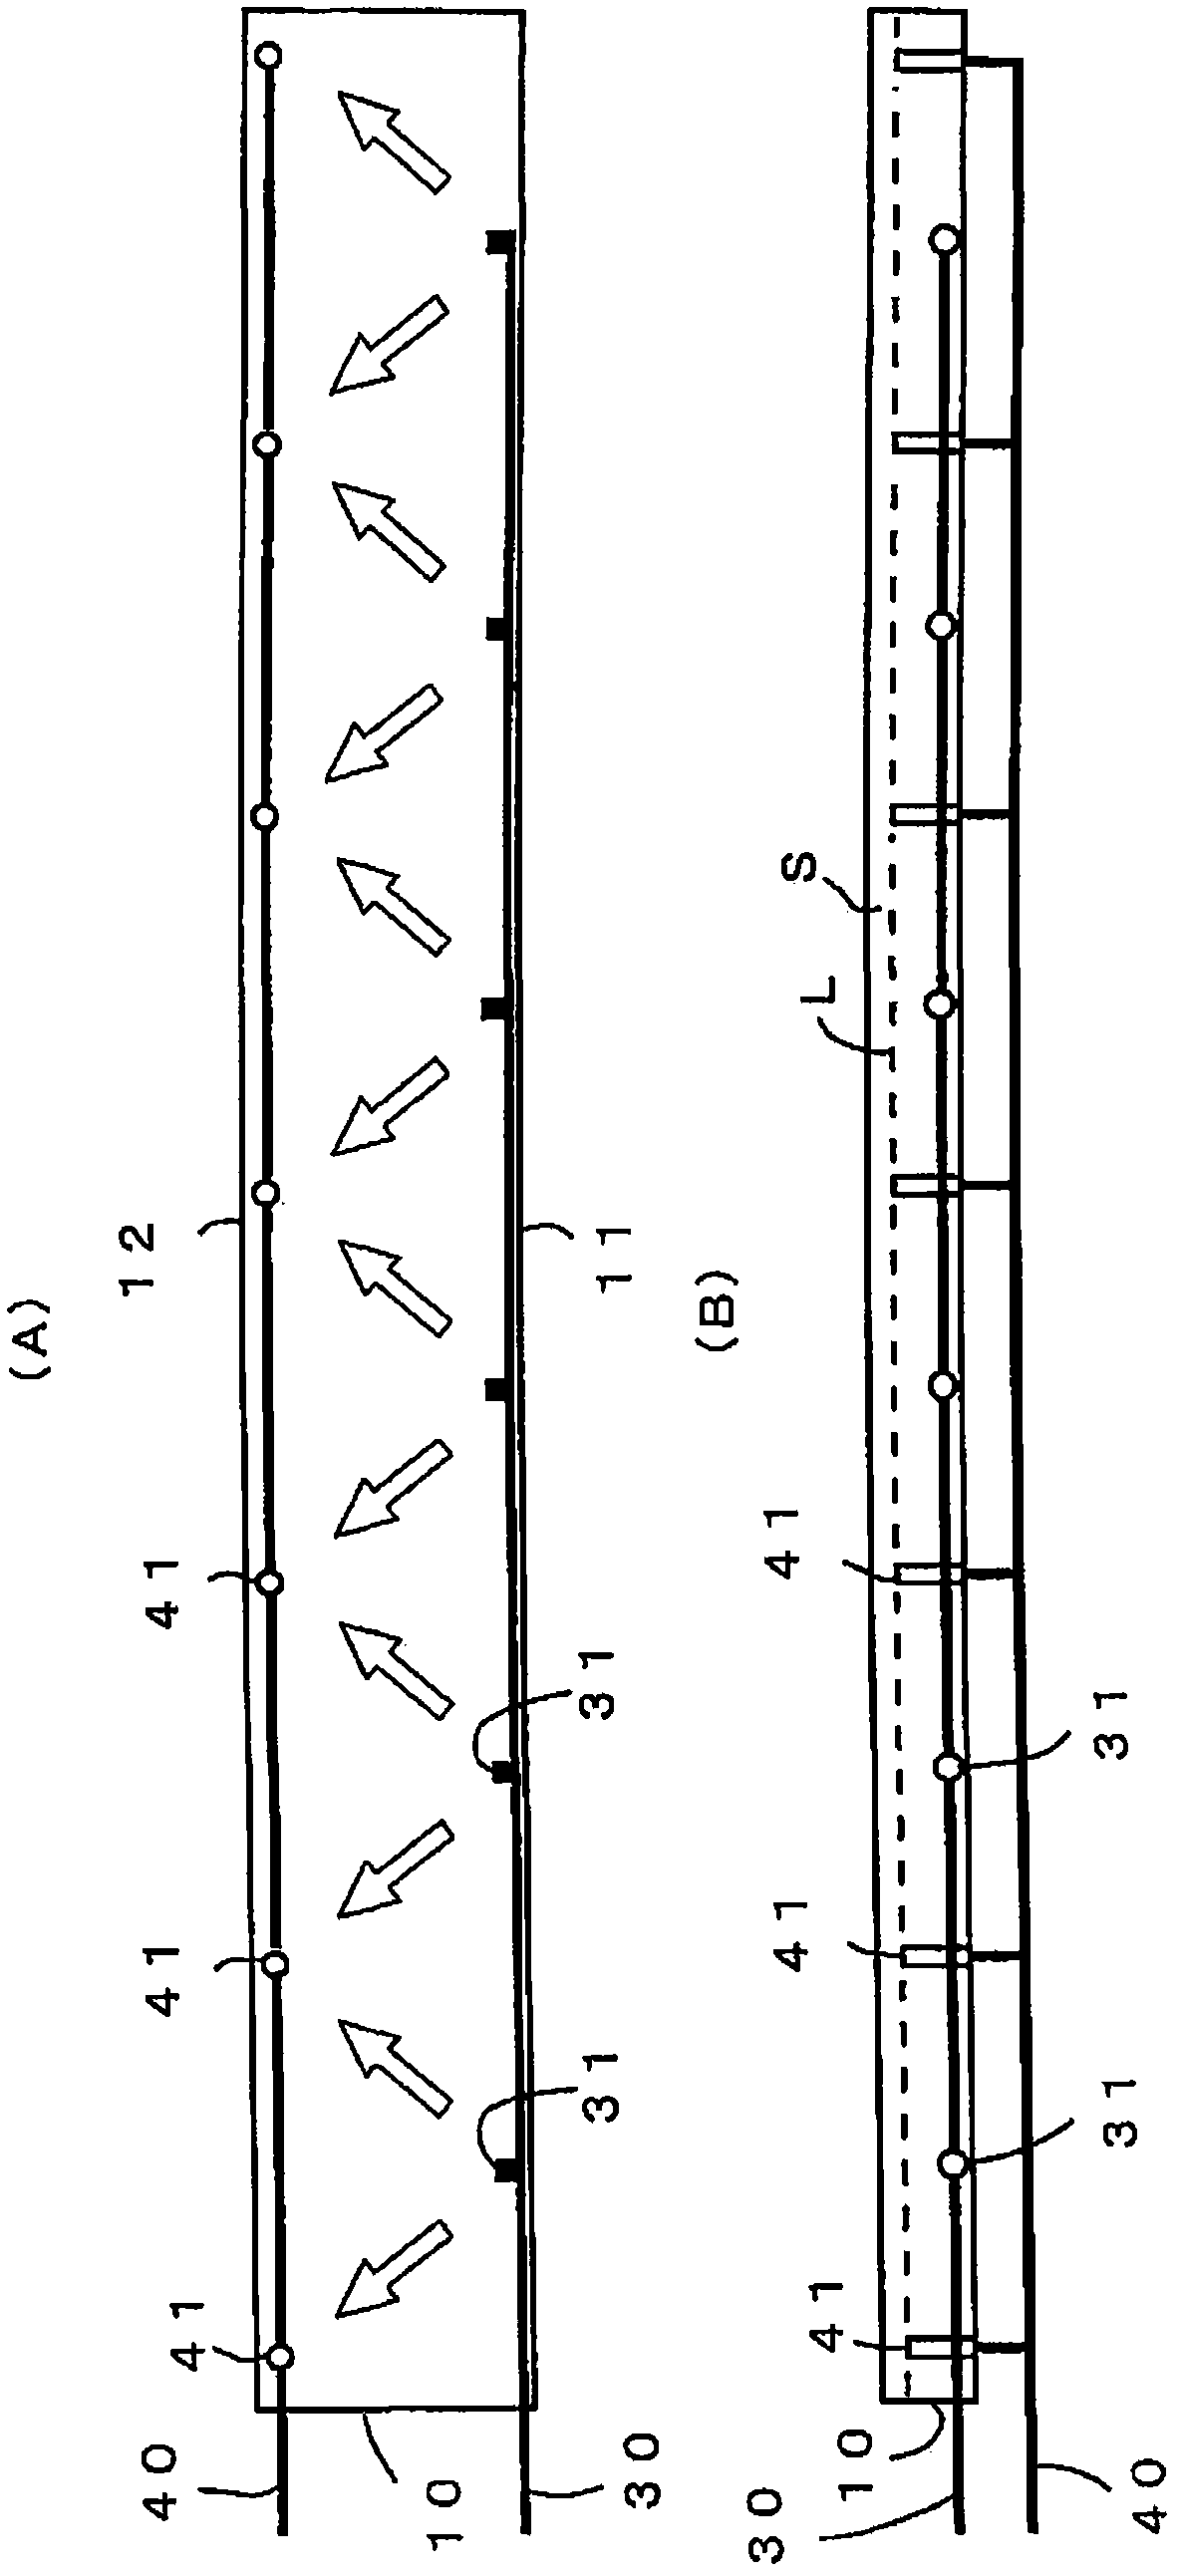 Culture solution planting device